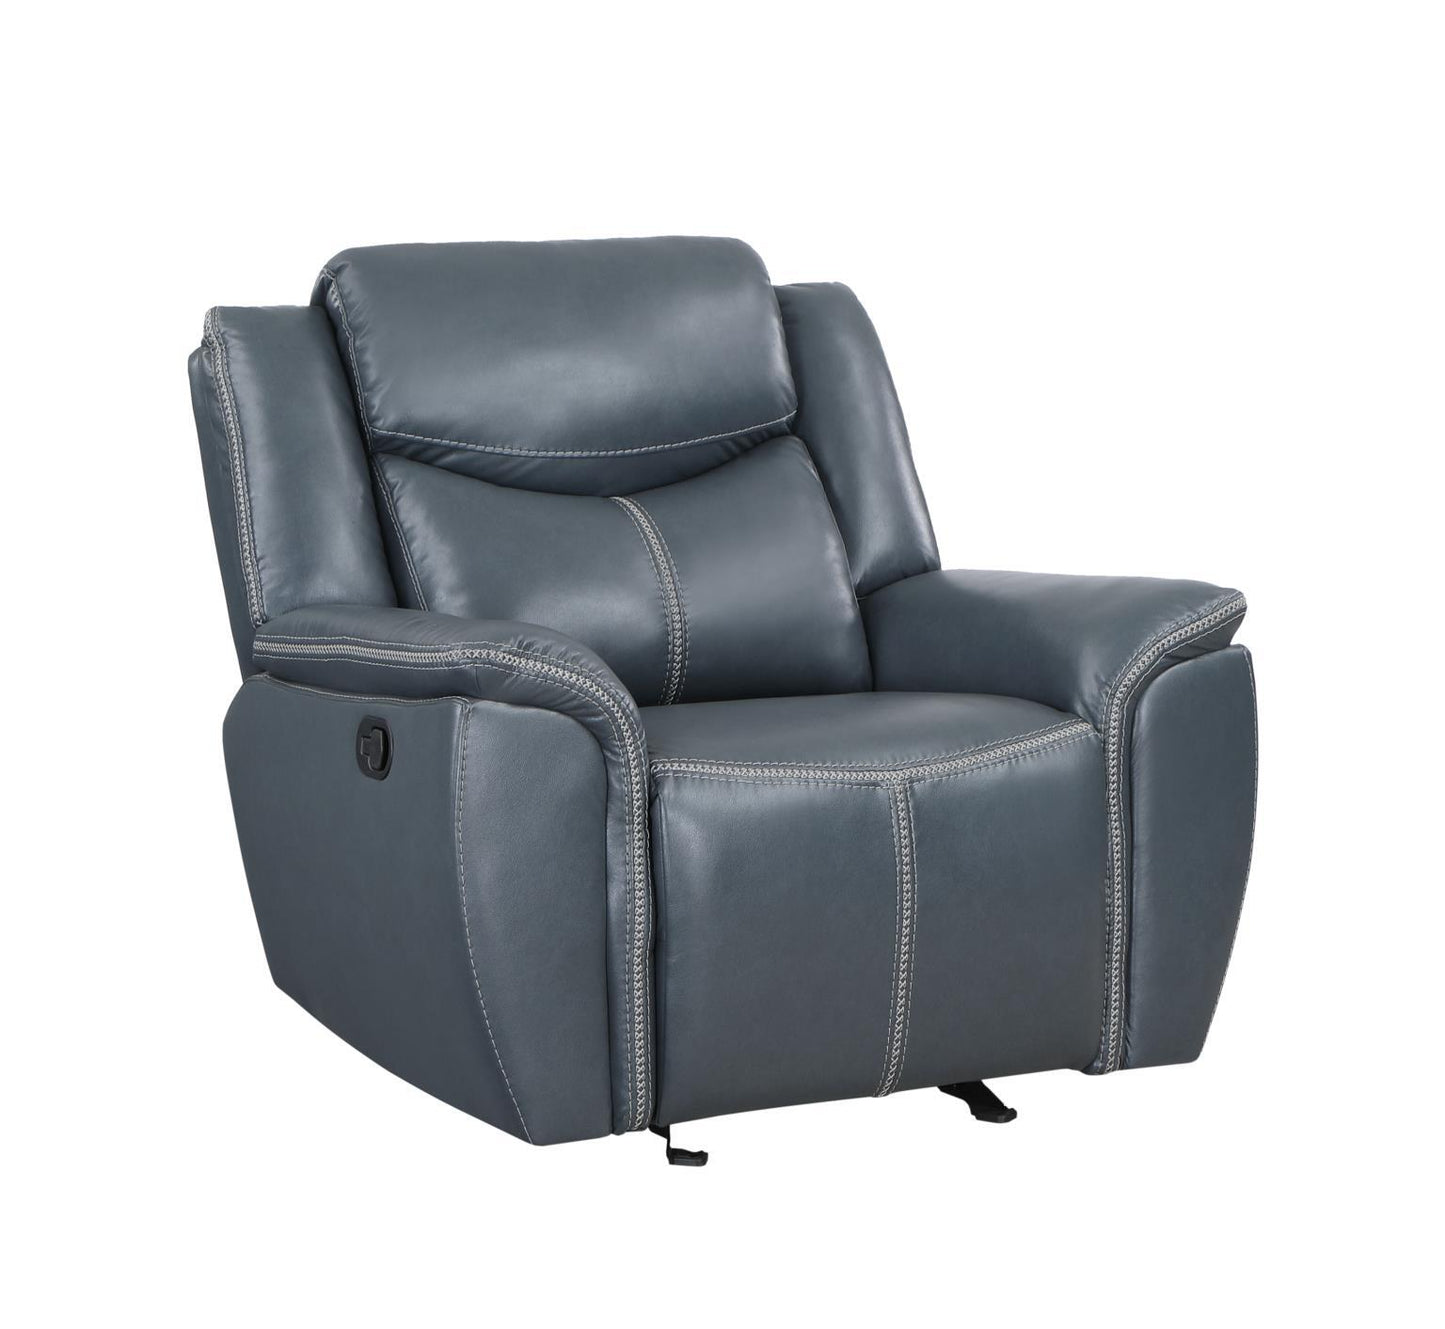 ERIC 1 Seater Reclining Chair Blue